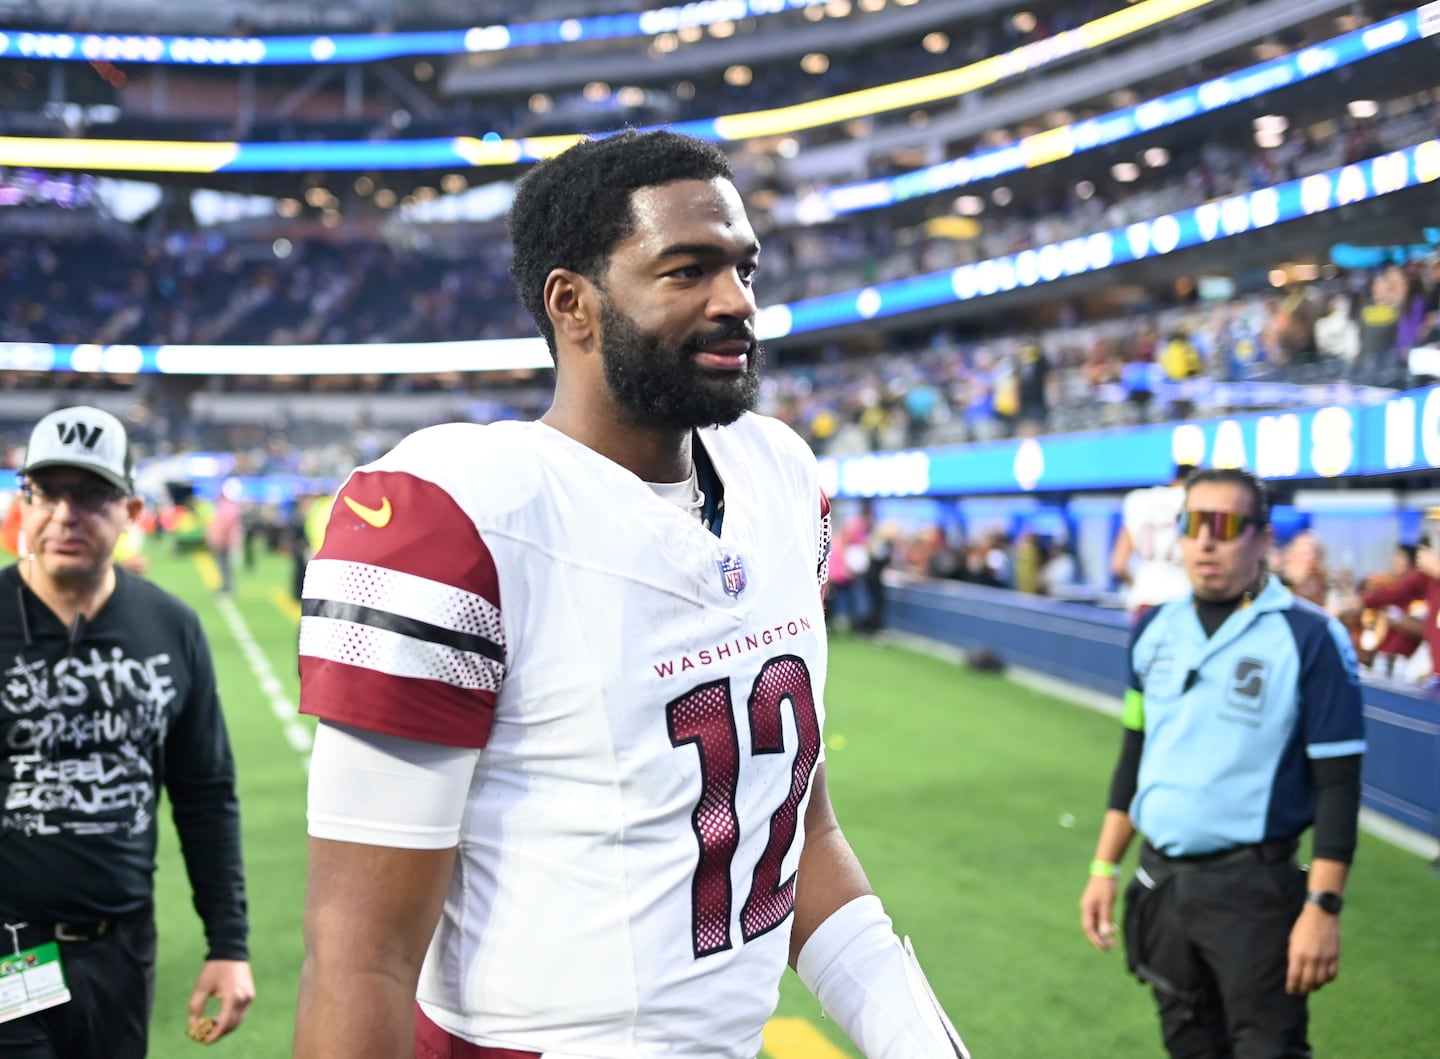 Jacoby Brissett will start at QB in Commanders’ game vs. 49ers on Sunday